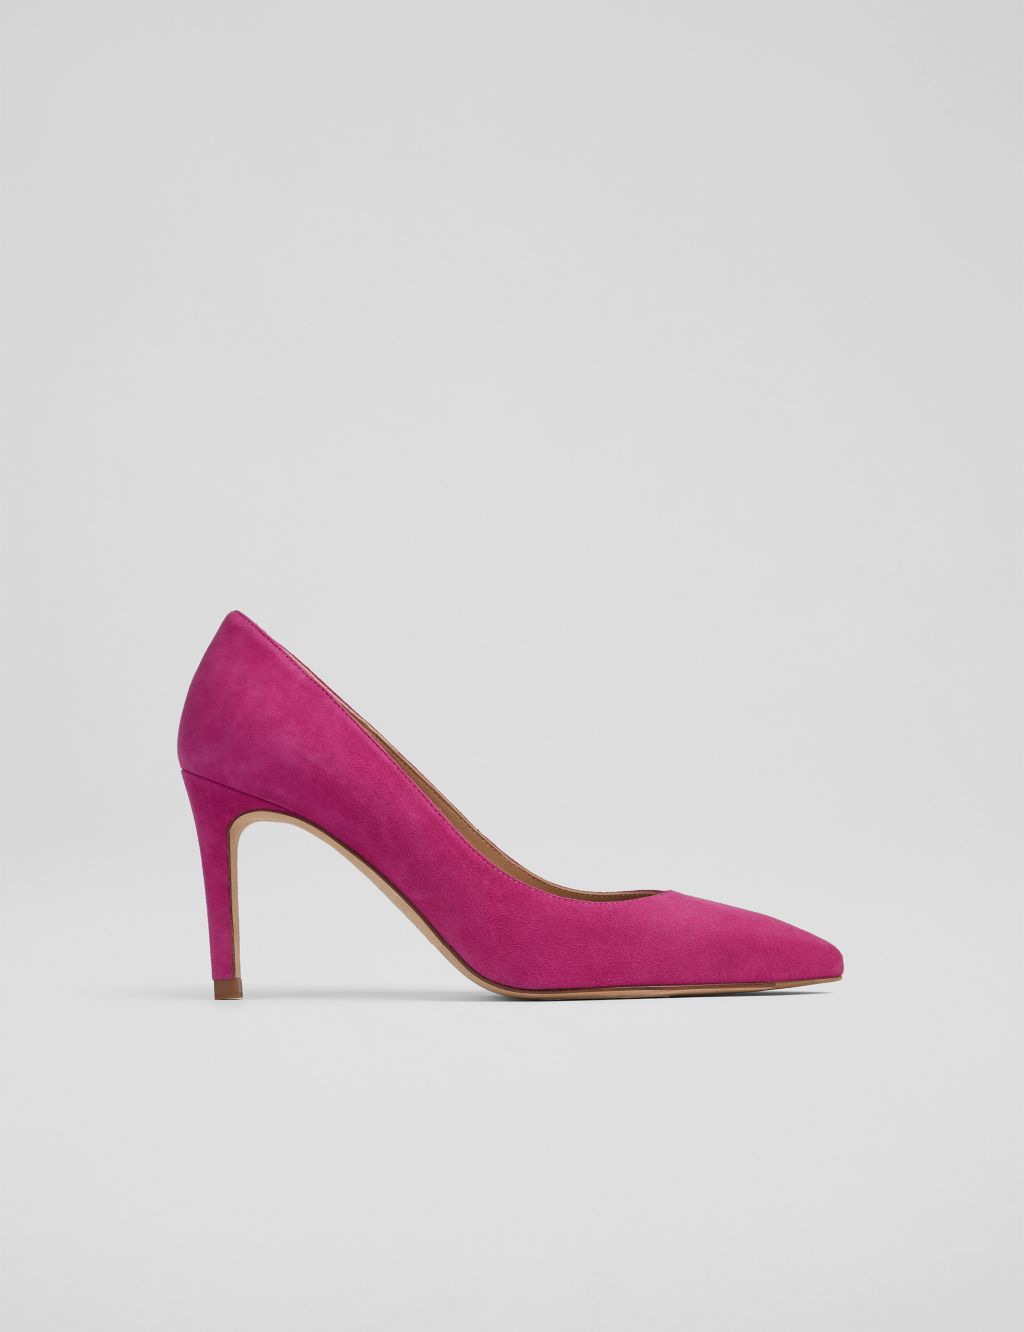 Suede Stiletto Heel Pointed Court Shoes